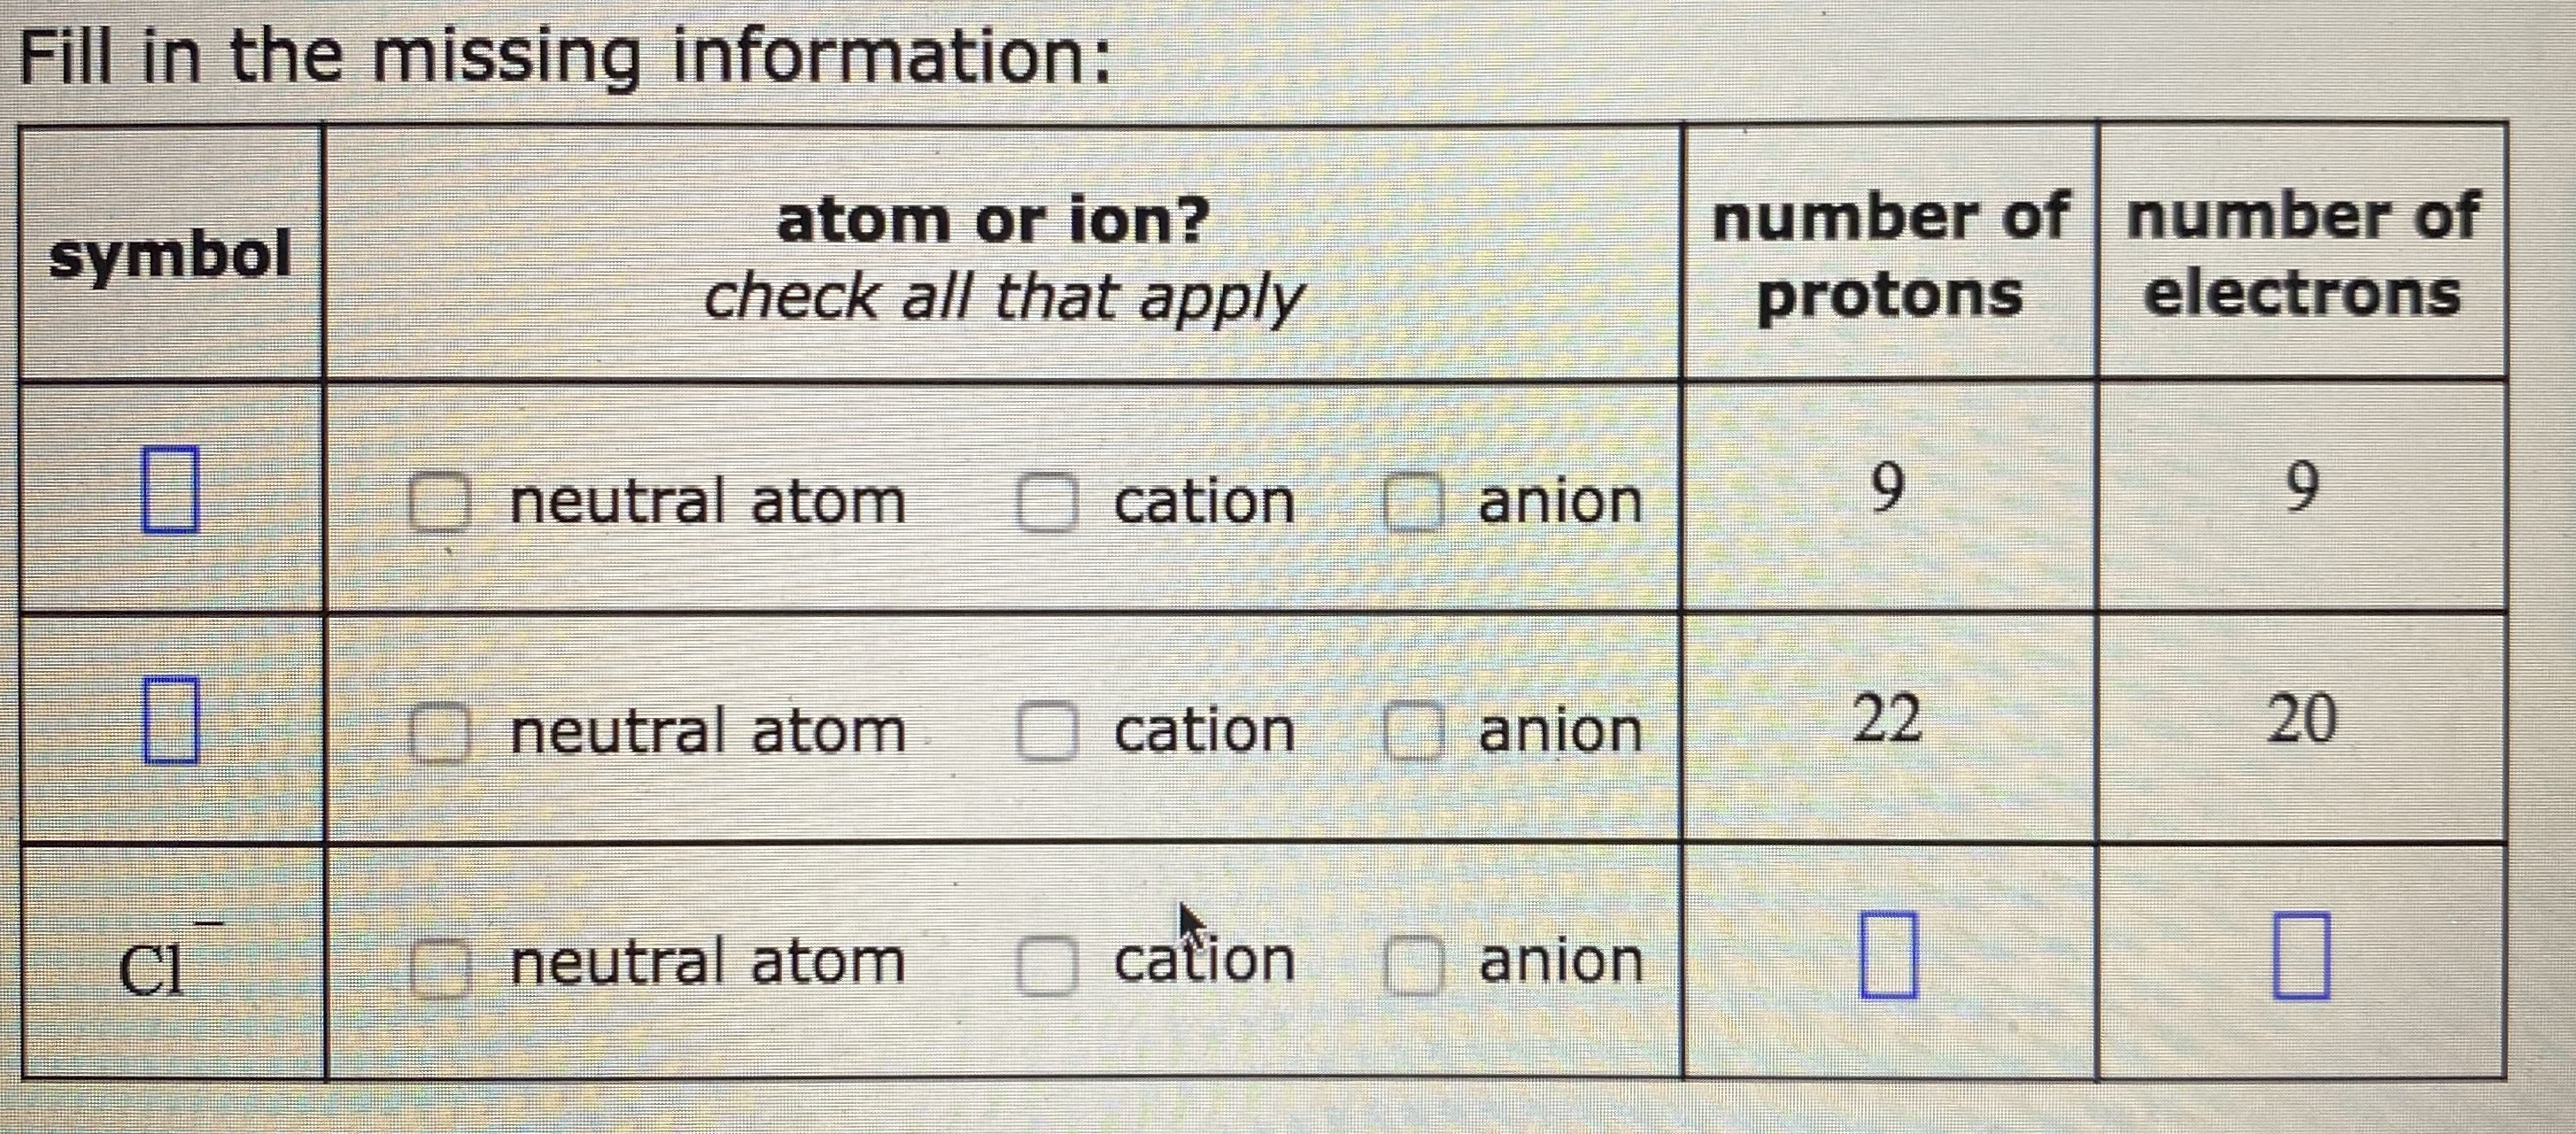 Neutral Atoms Vs Ions Worksheet Throughout Atoms Vs Ions Worksheet